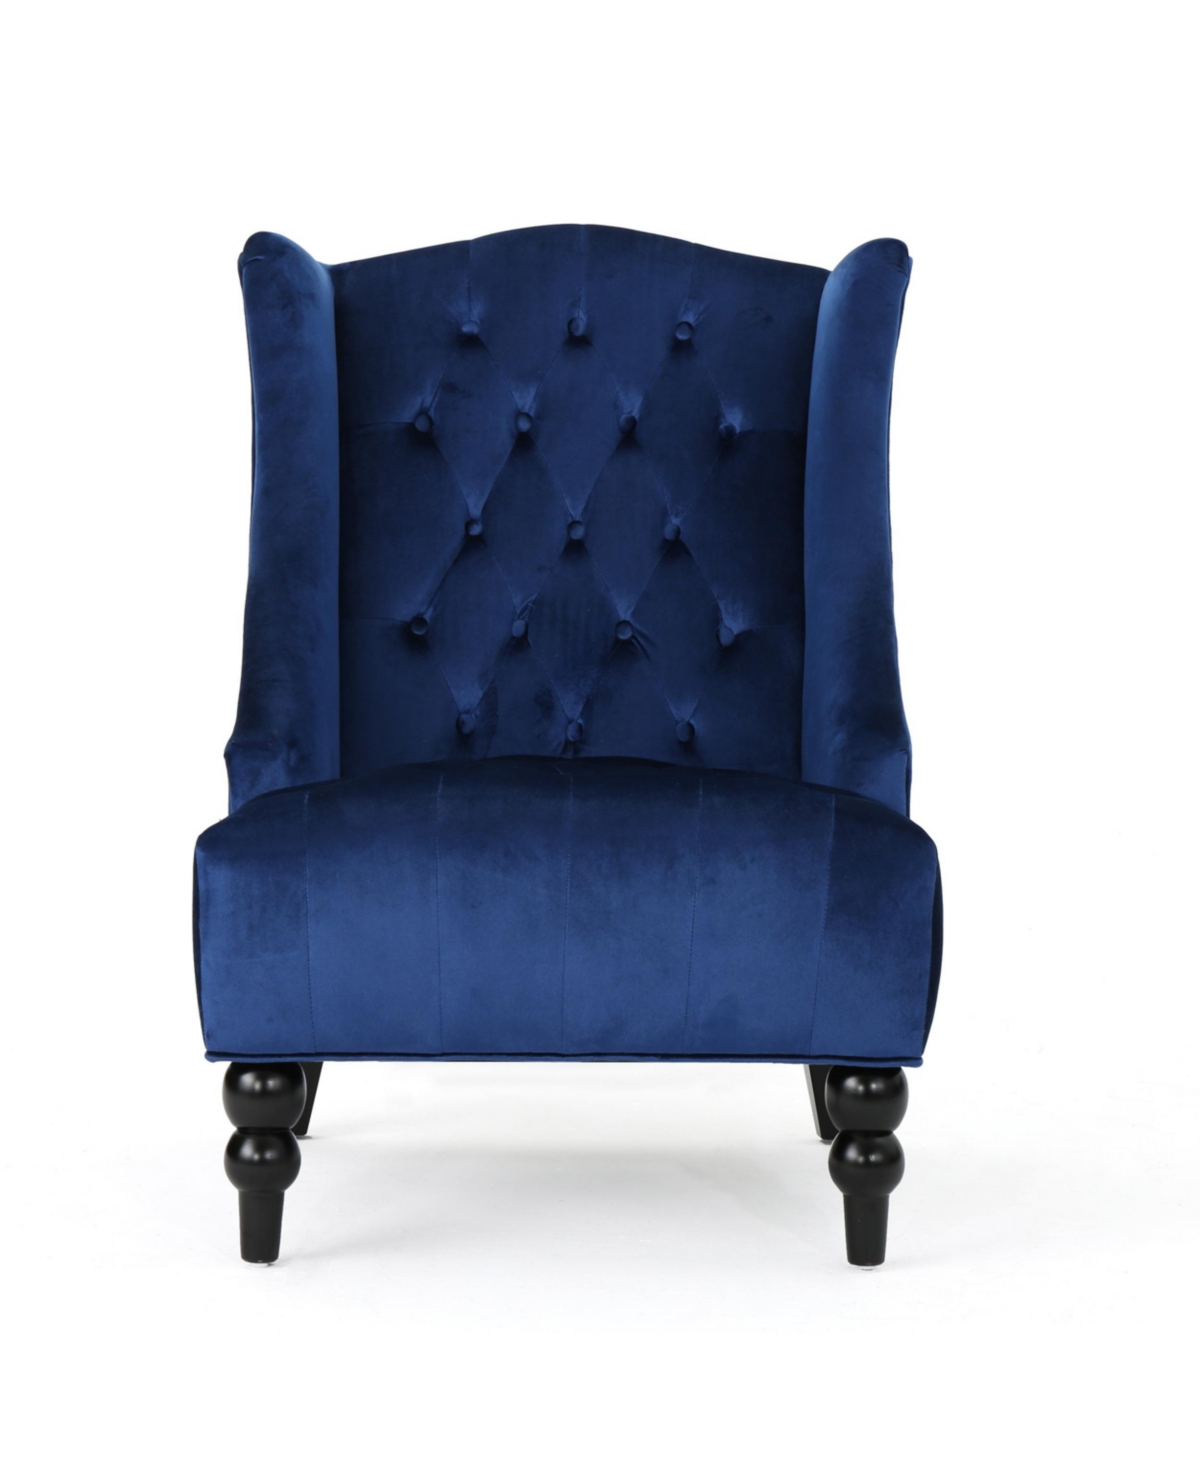 Noble House Toddman High-back Club Chair In Navy Blue